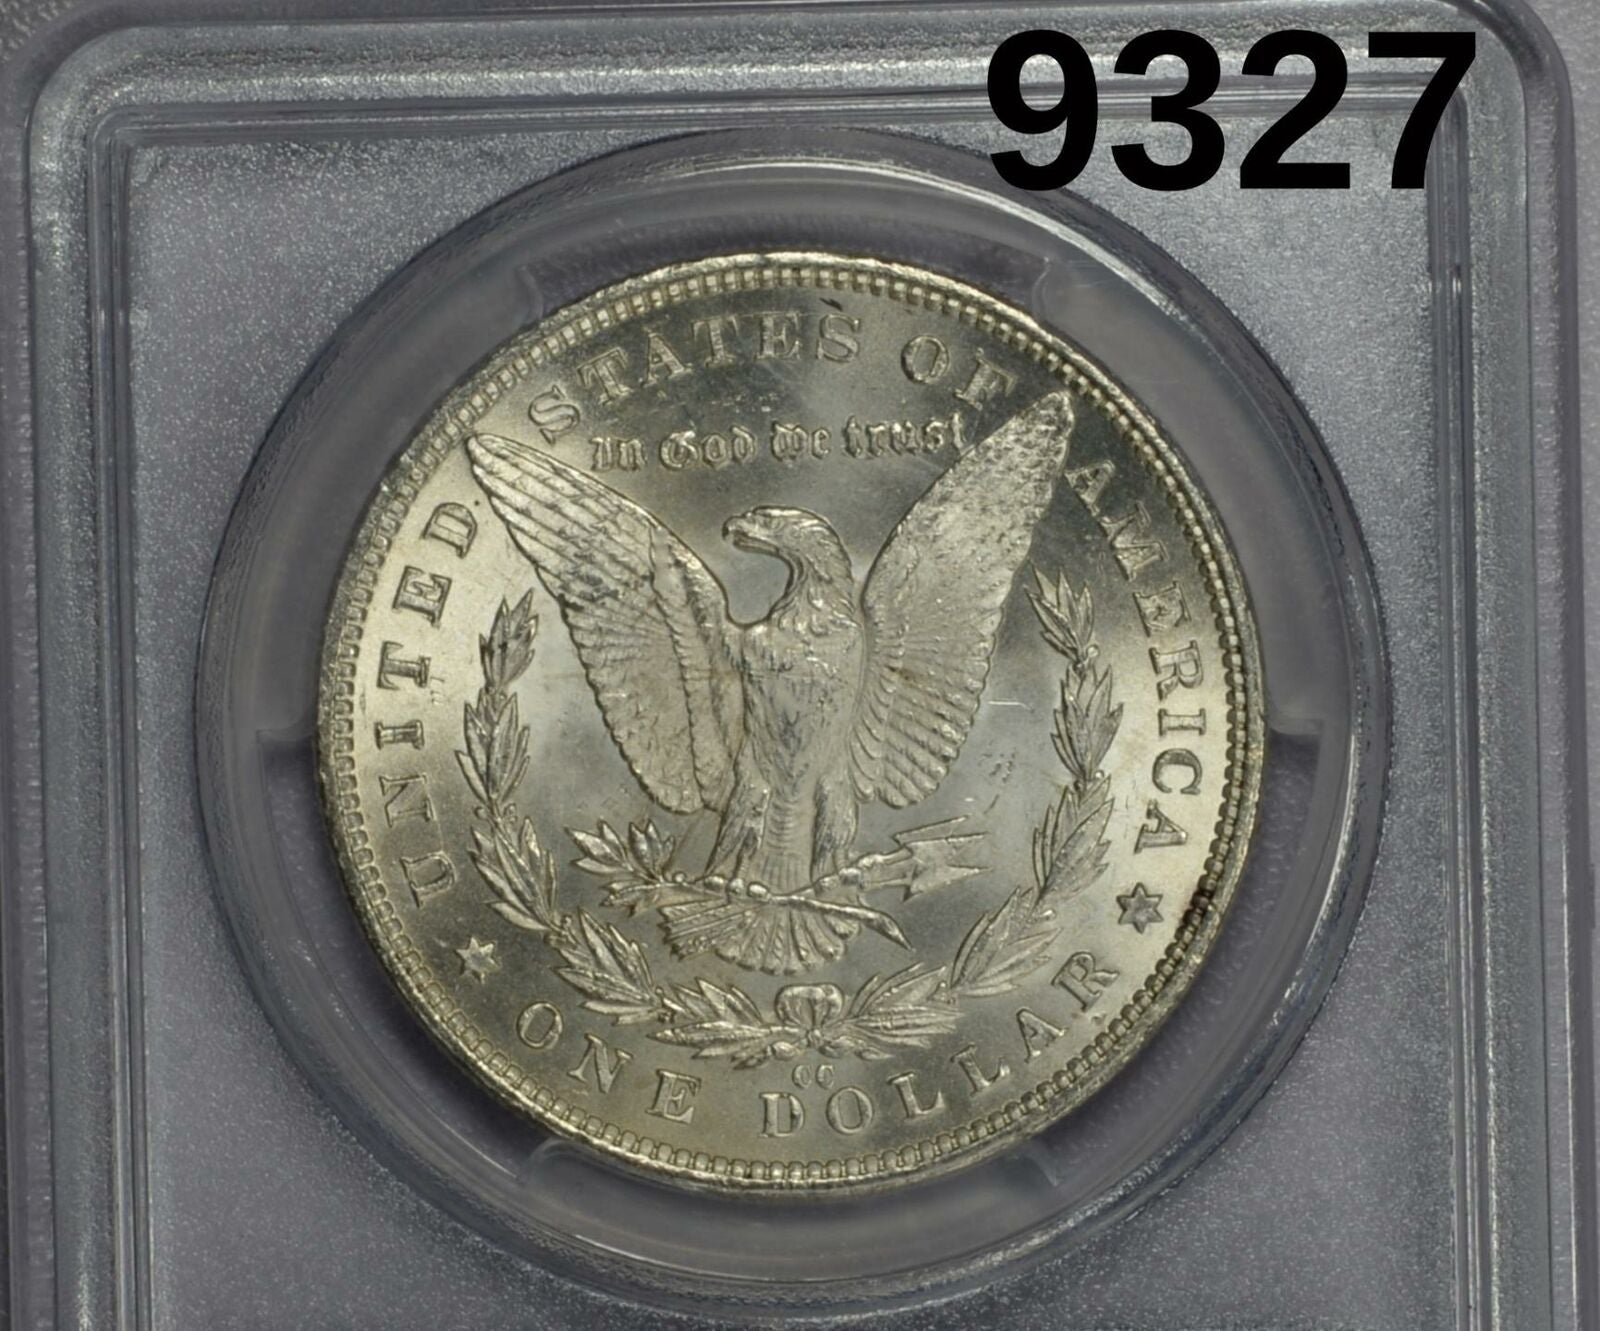 1881 CC MORGAN SILVER DOLLAR PCGS CERTIFIED MS65 FULL FROSTY WHITE!! #9327